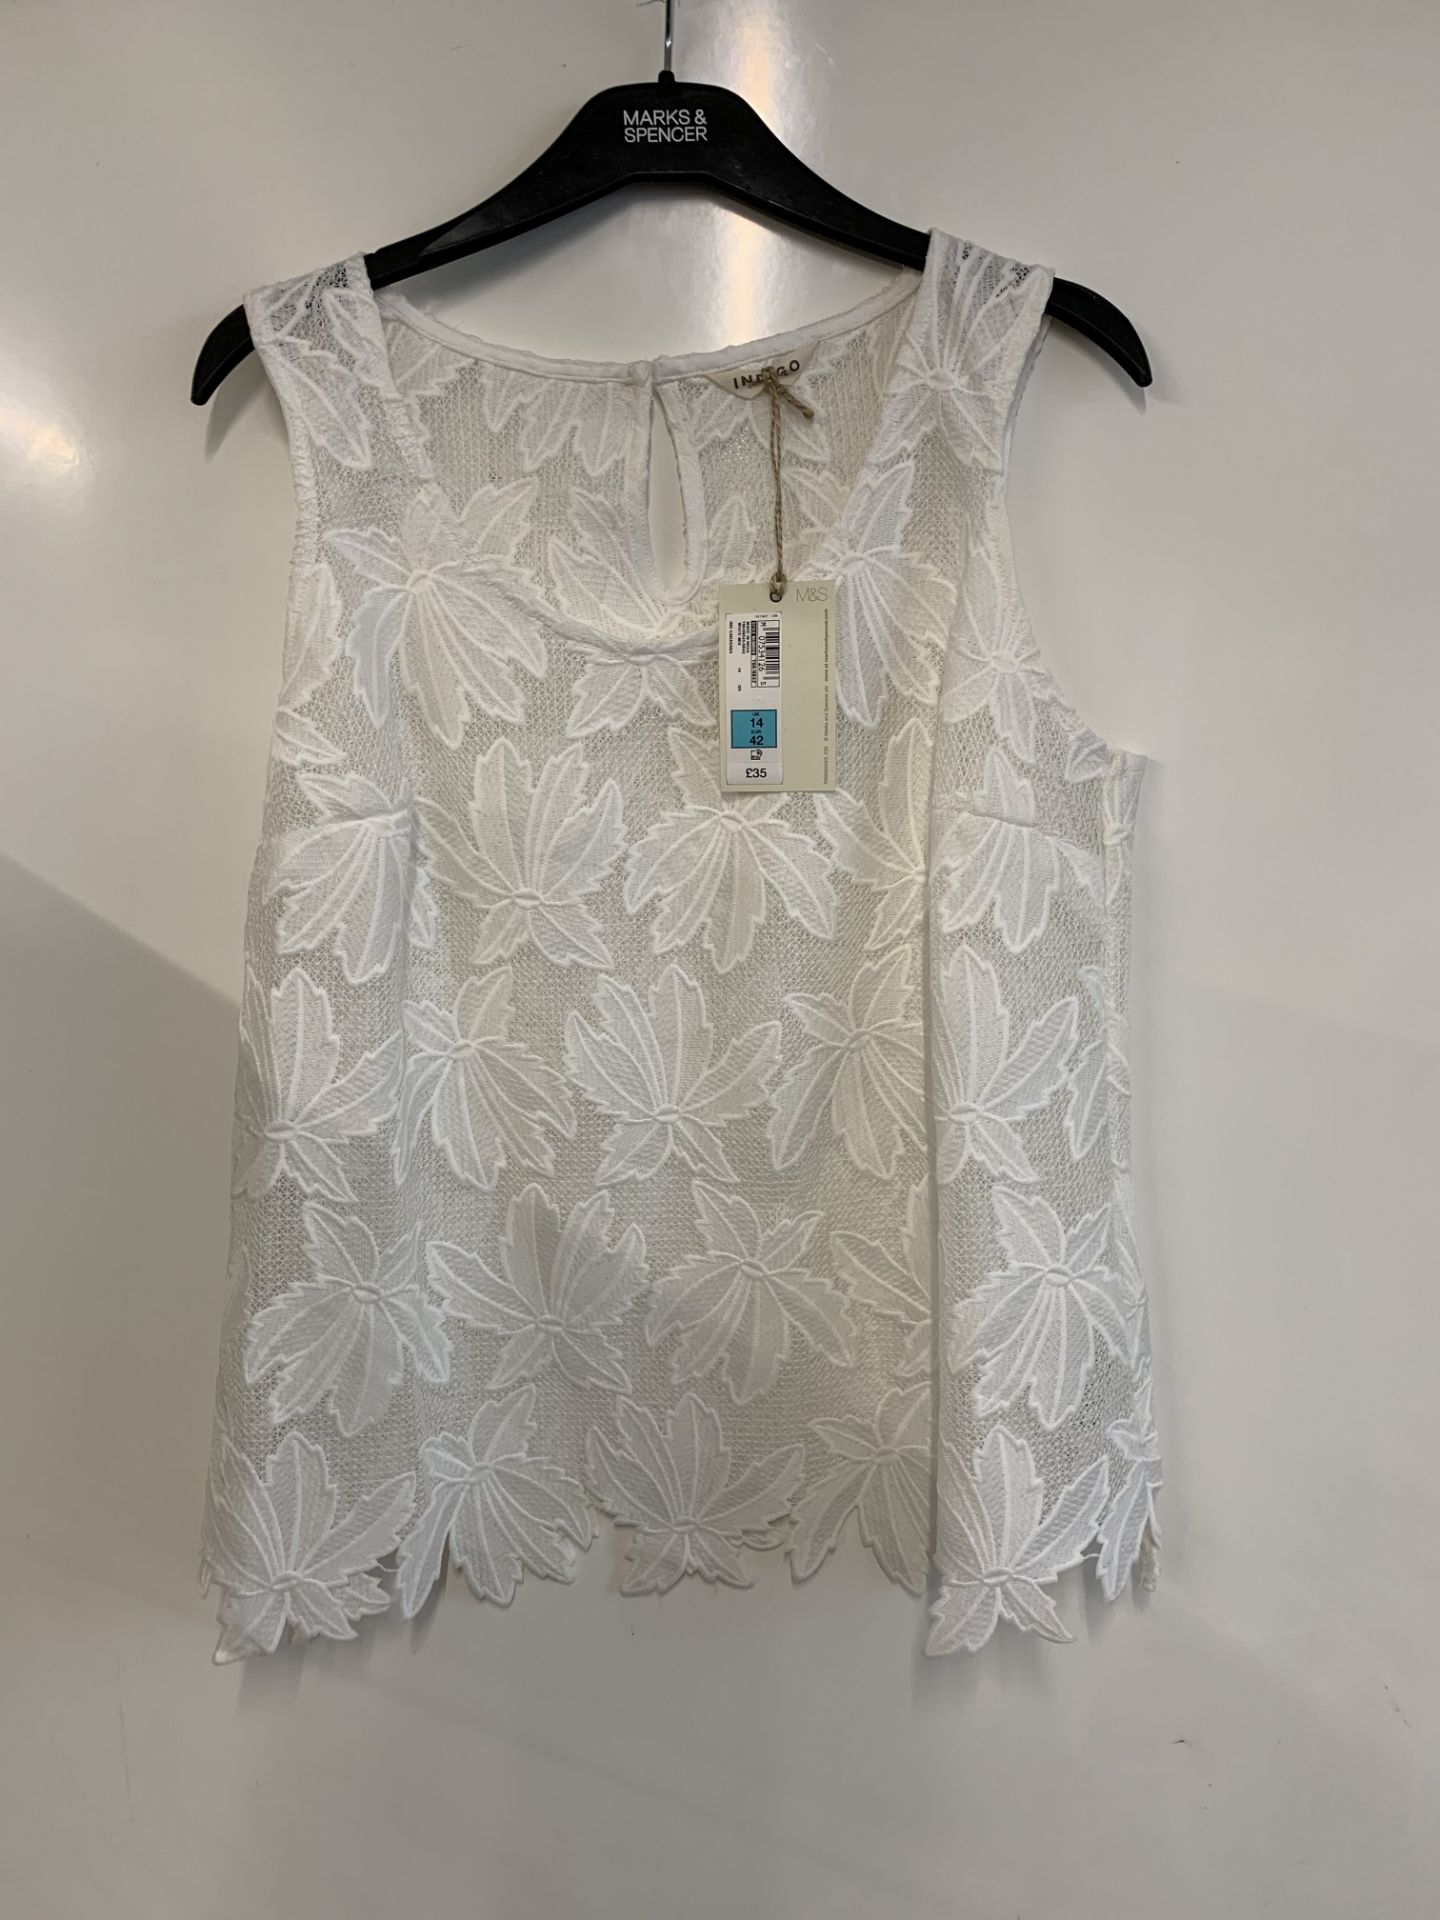 M&S women's Top with short sleeves decorated with floral lace | RRP 80.00